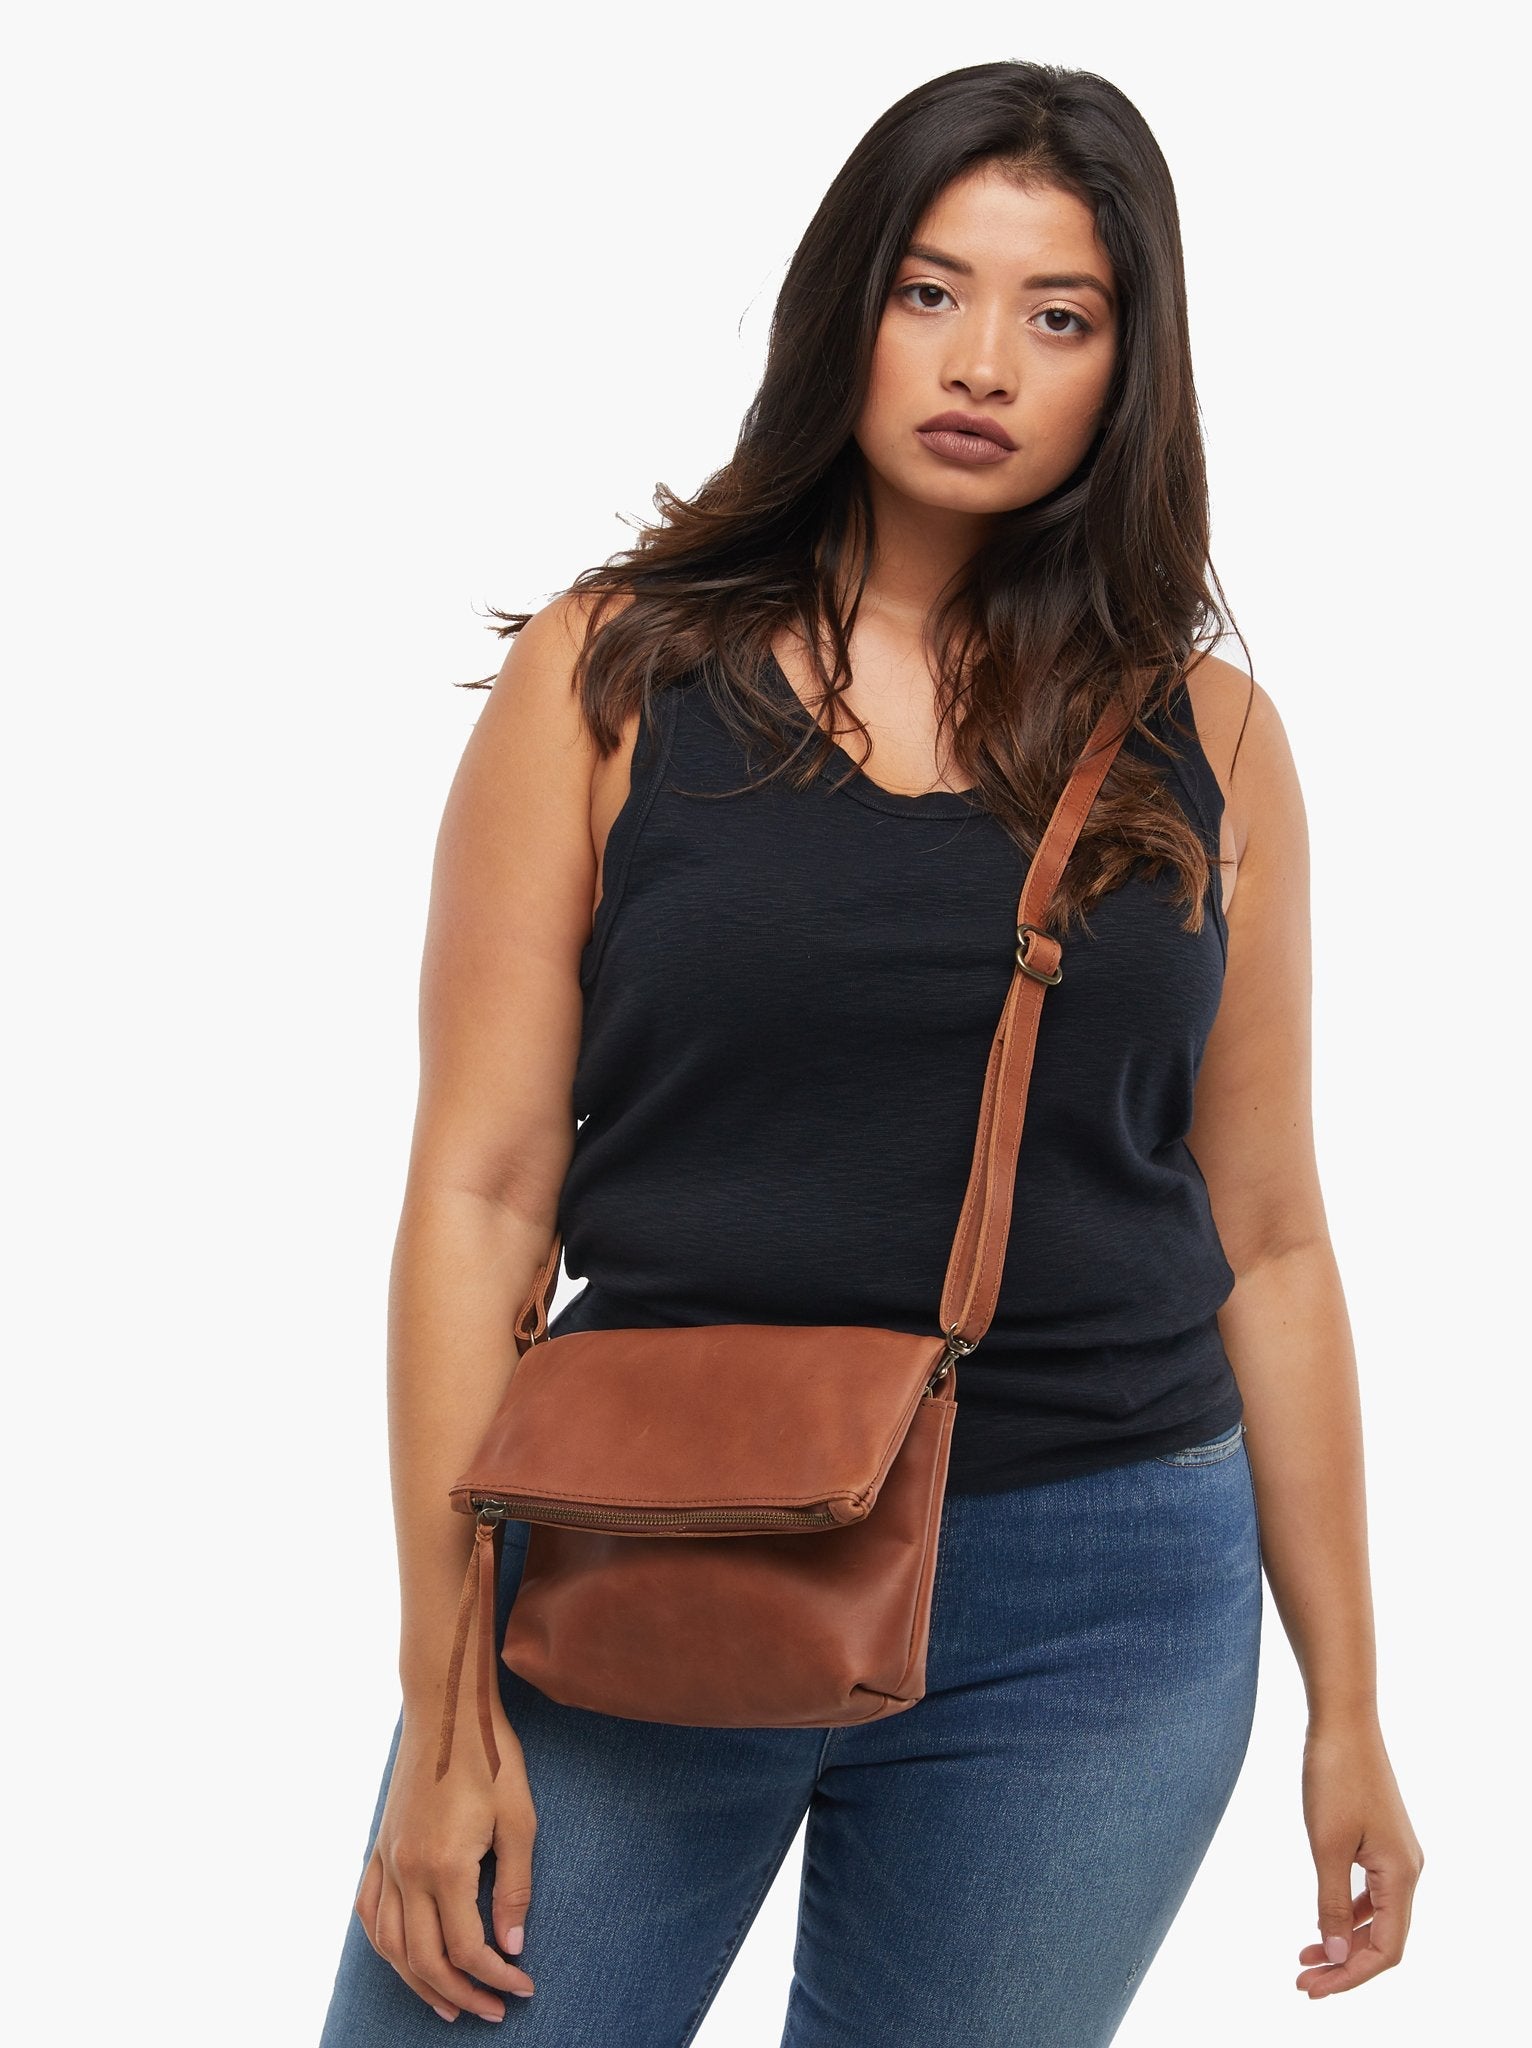 ABLE - The Emnet Foldover Crossbody